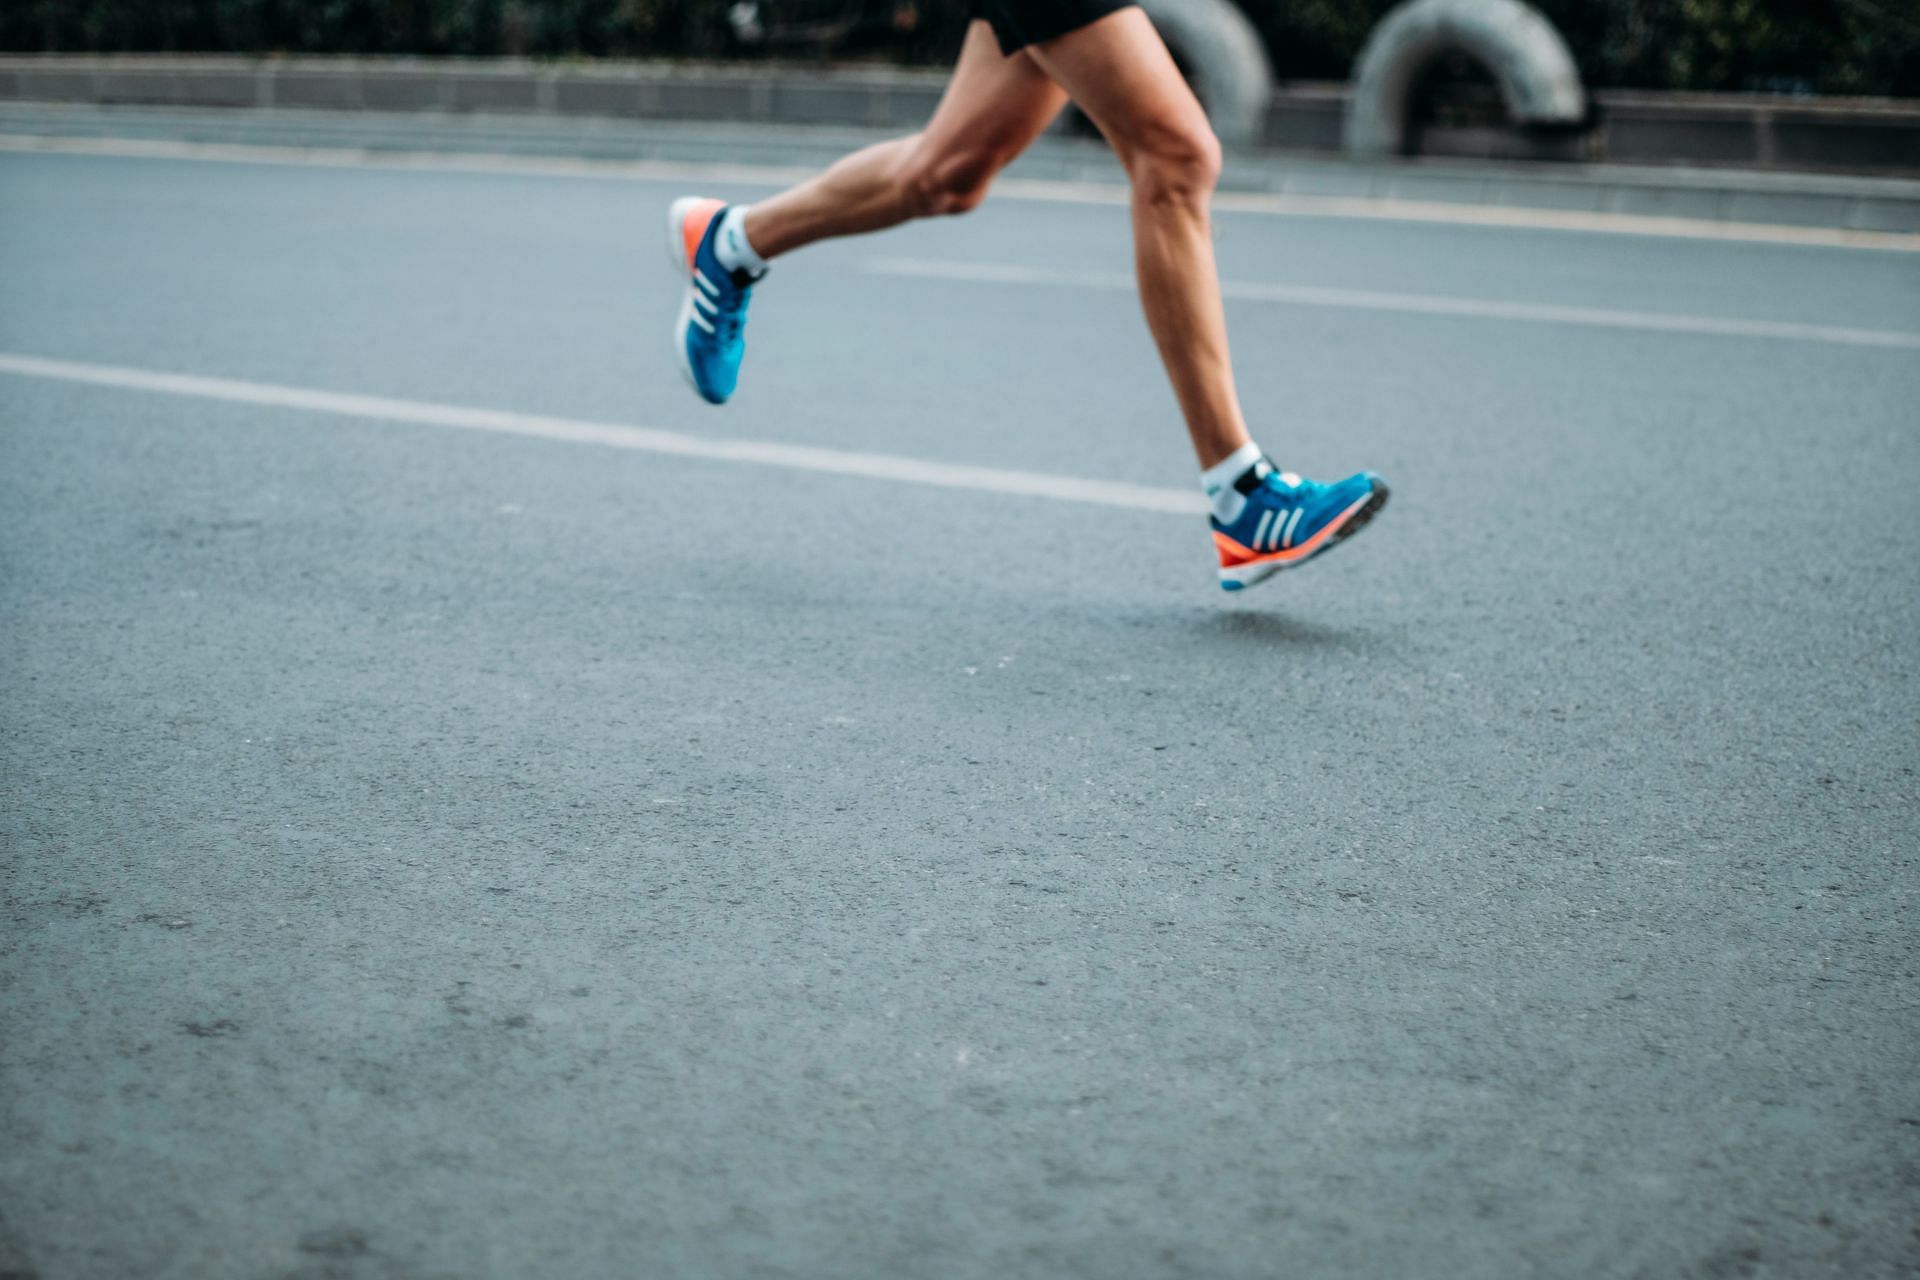 Running can put strain on your arteries. (Image by Sporlab / Unsplash)